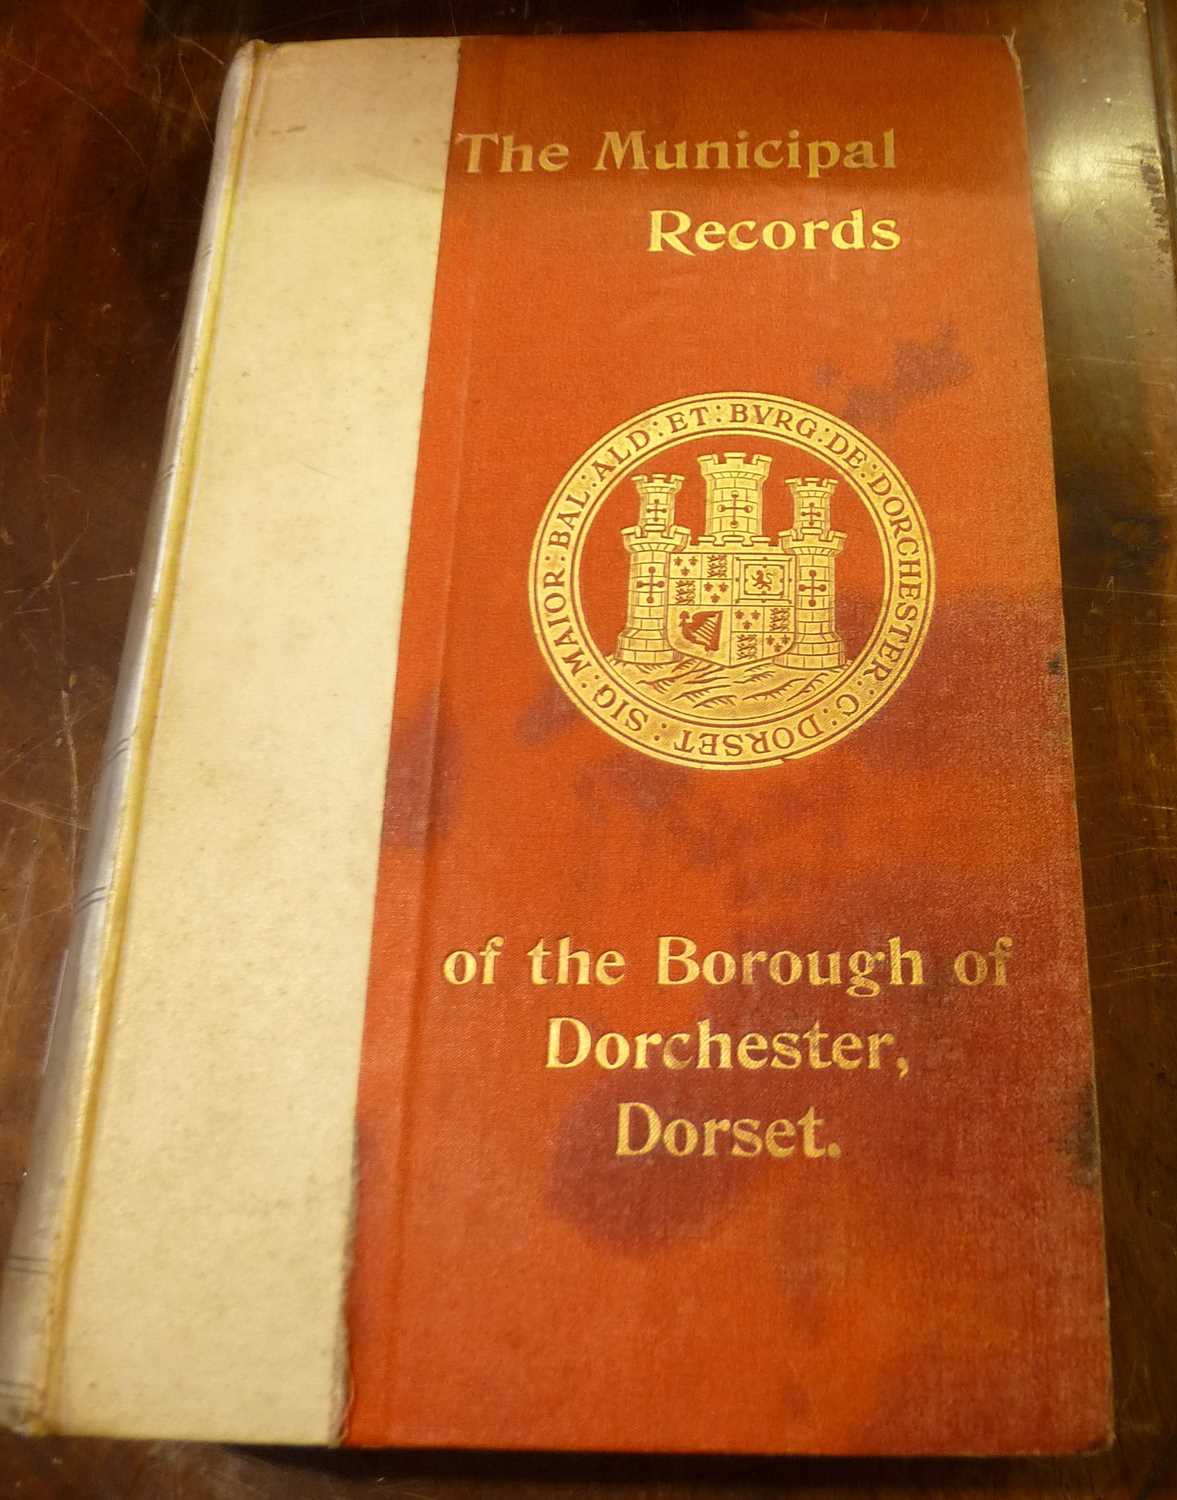 A 1908 vol of "The Municipal Records of the Borough of Dorchester, Dorset", Charles Mayo, pub. in - Image 6 of 6